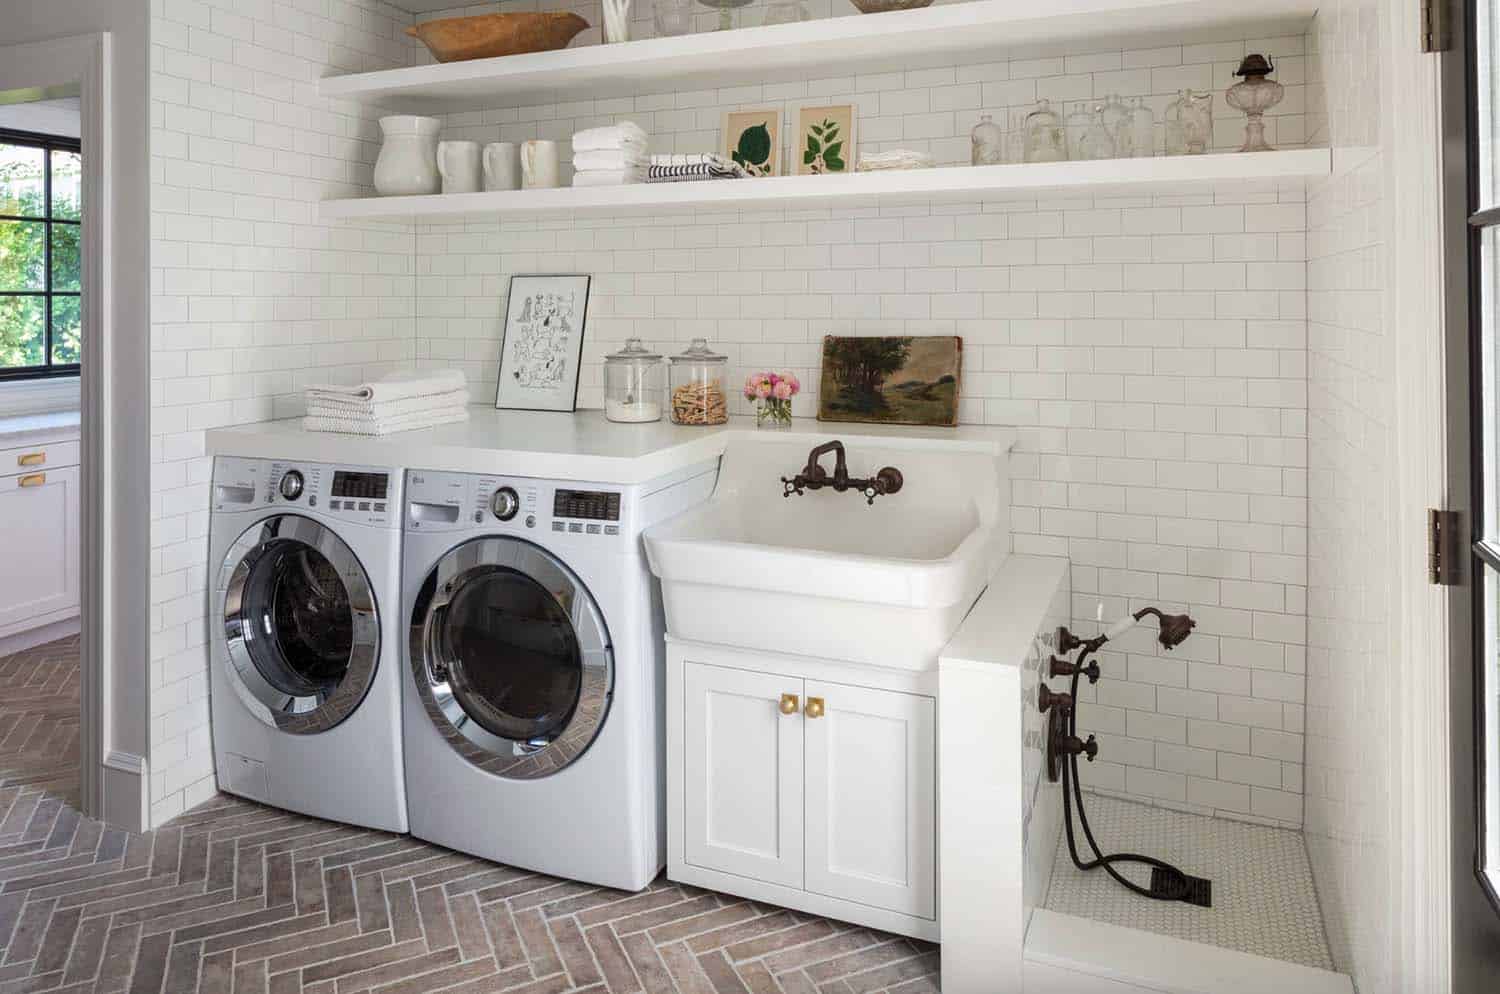 How To Design A Laundry Room: Expert Layout And Design Tips